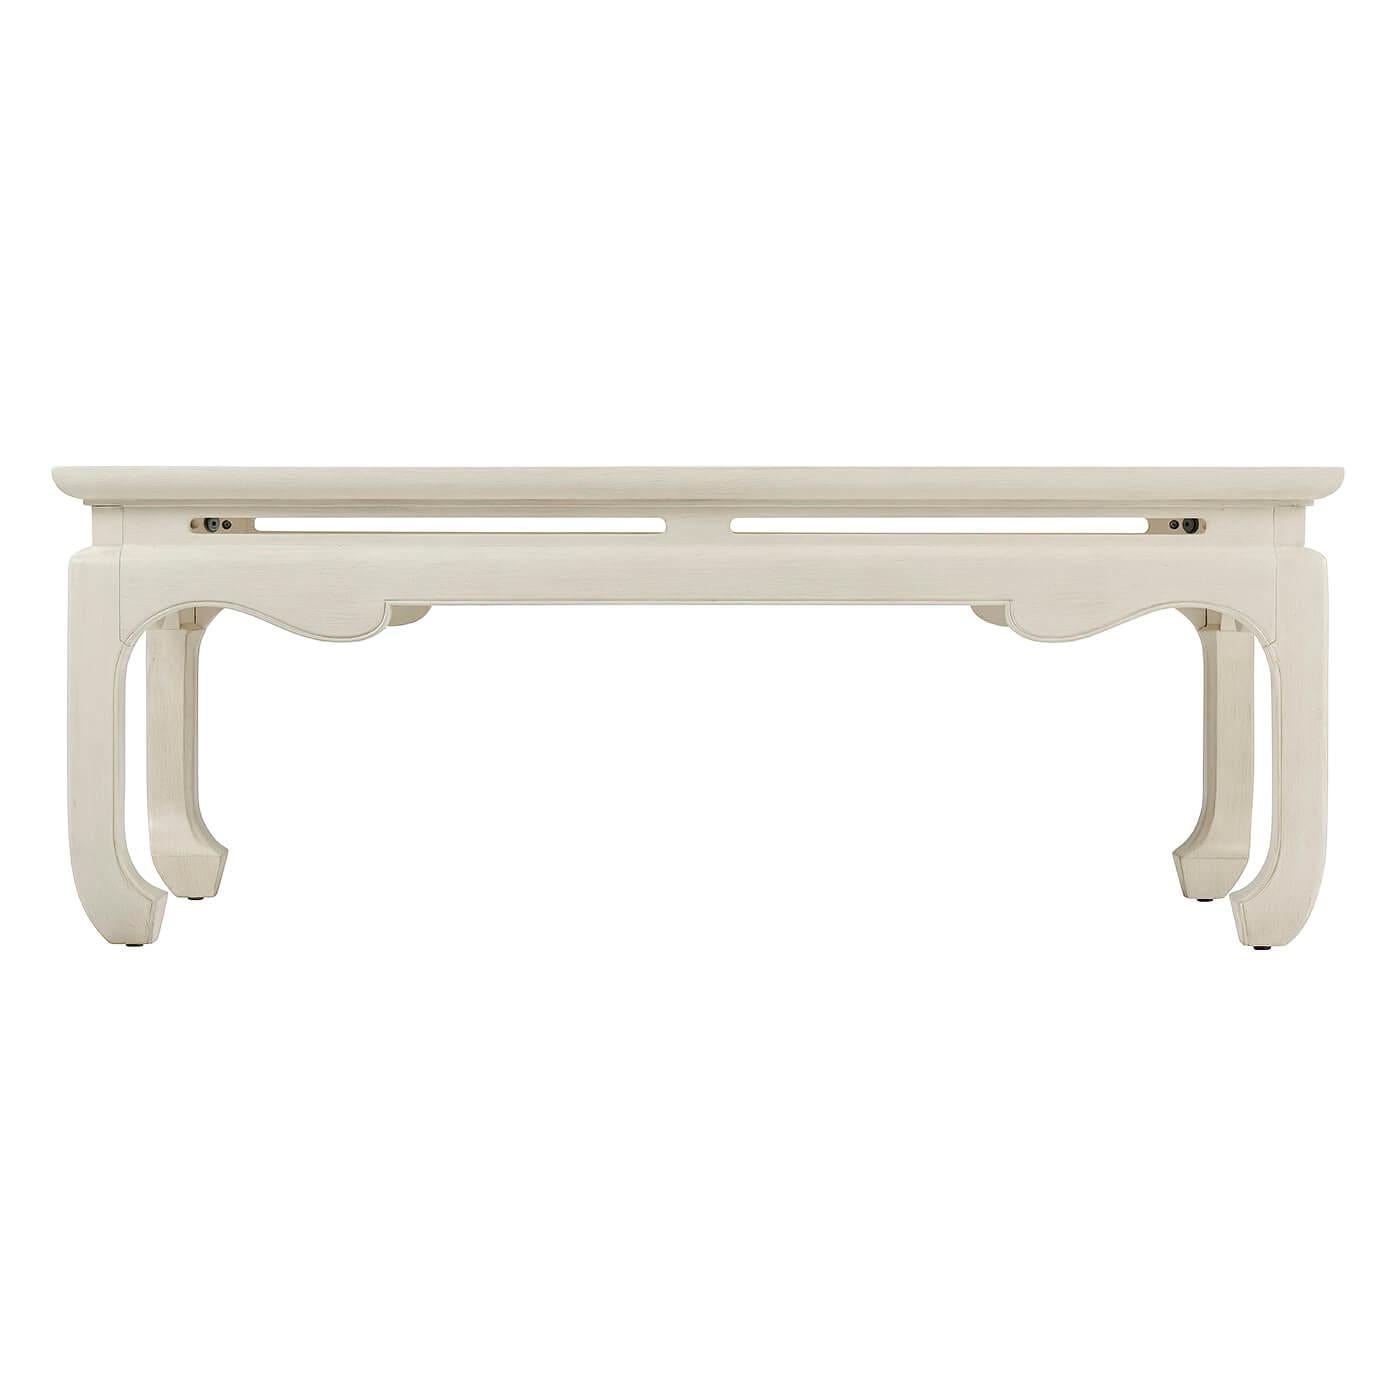 Chinese style cocktail table, a fresh modern update on a classic Chinoiserie silhouette. The rectangular tabletop with a beautiful pierced and wavy apron is set on inswept legs.
Shown in Salted White Finish
Dimensions: 48